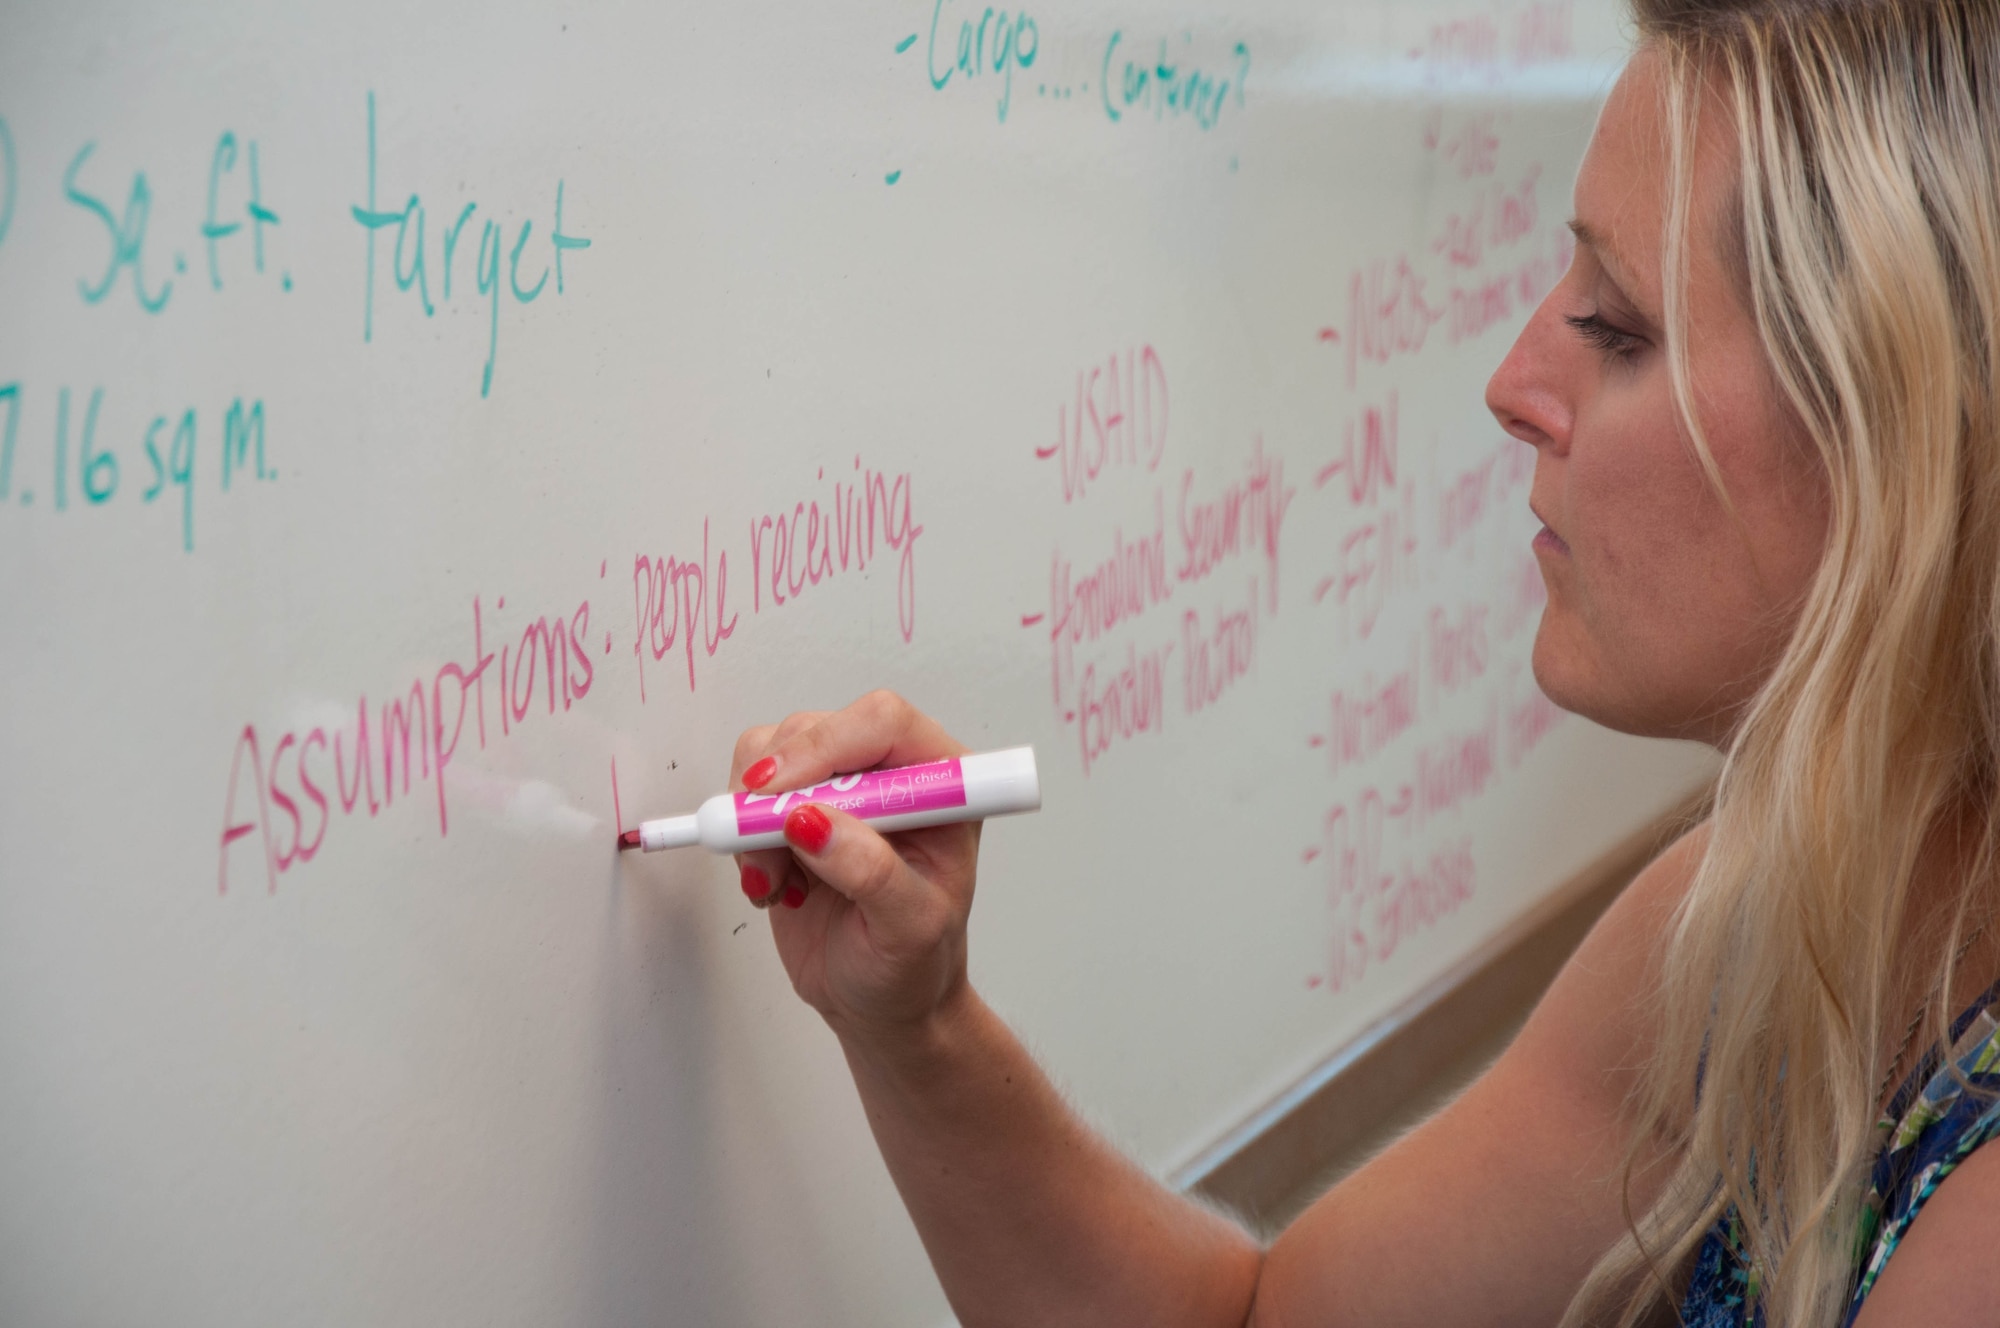 DAYTON, Ohio – Erin Nichols, a program manager on Team Wright-Patt, writes down project assumptions on a team whiteboard during a brainstorming session Aug. 2 as part of the Air Force Research Laboratory’s Commander’s Challenge 2017. The challenge this year is to remotely move 50 pounds of supplies to a location 30 miles away, delivering them to an area smaller than 400 square feet. (U.S. Air Force photo/John Harrington)